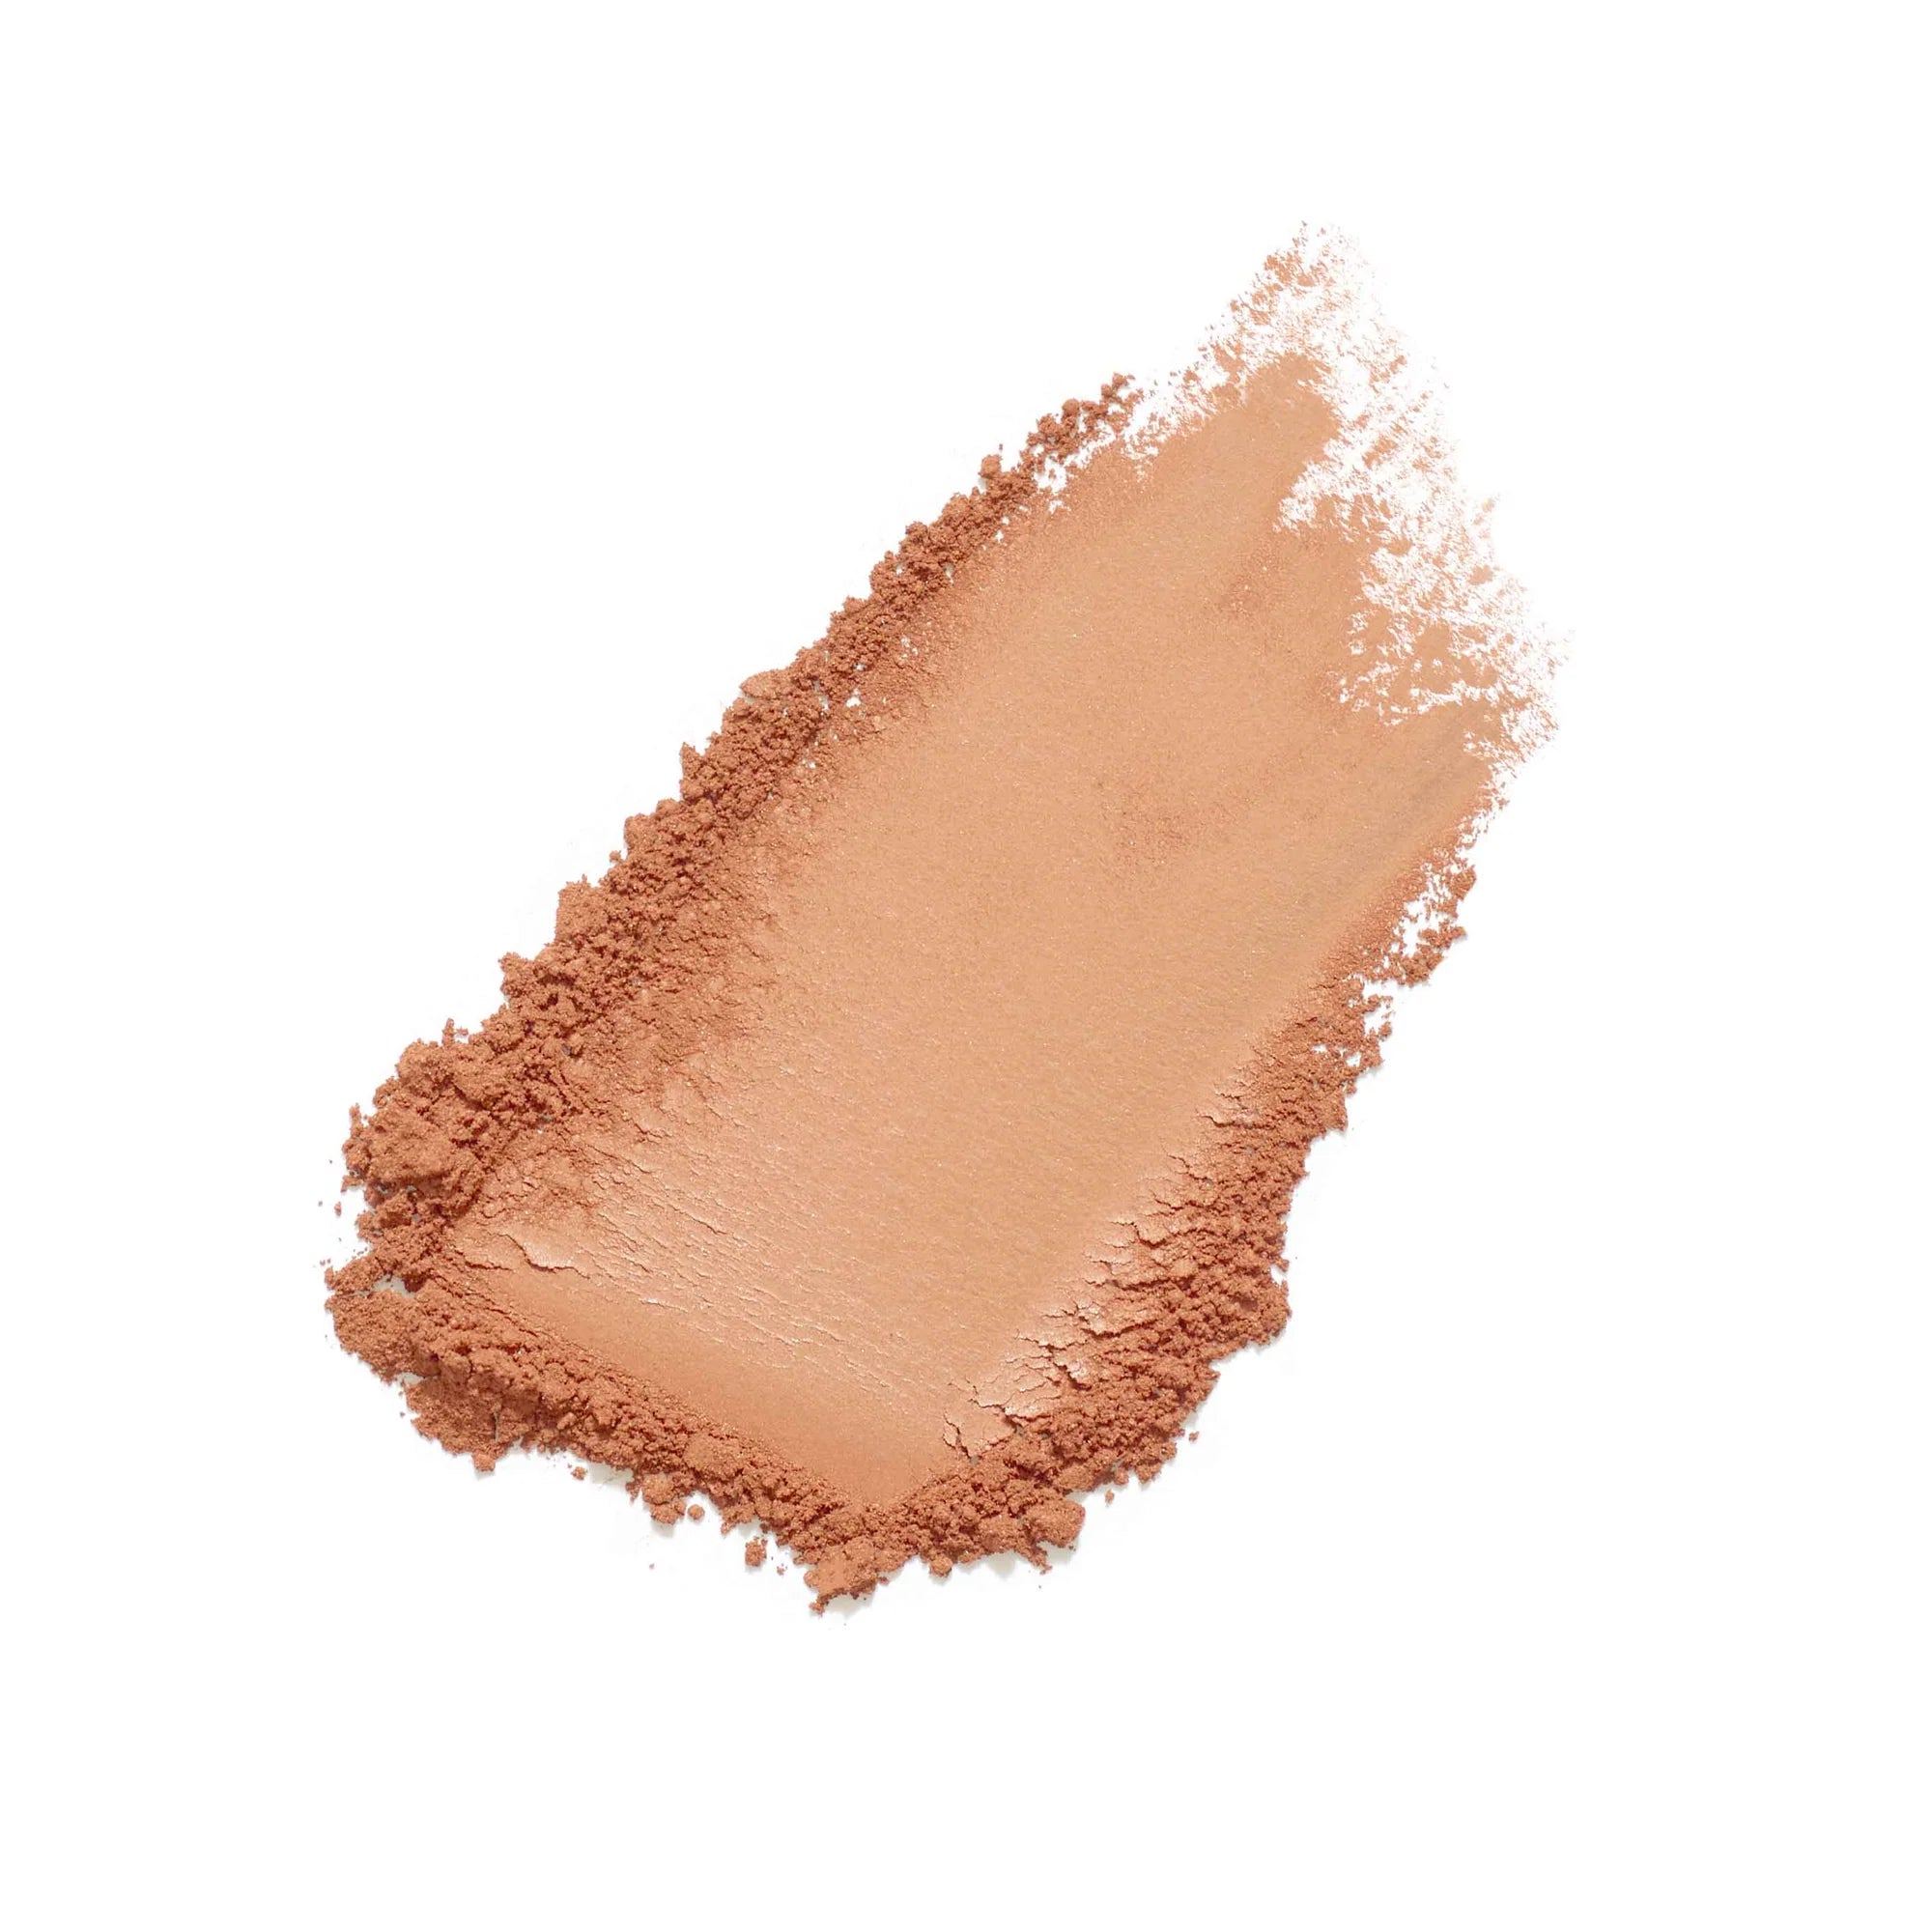 Jane Iredale's PureBronze Matte Bronzer Refill - shade Light - light brown - for natural bronzing and effortless contouring.